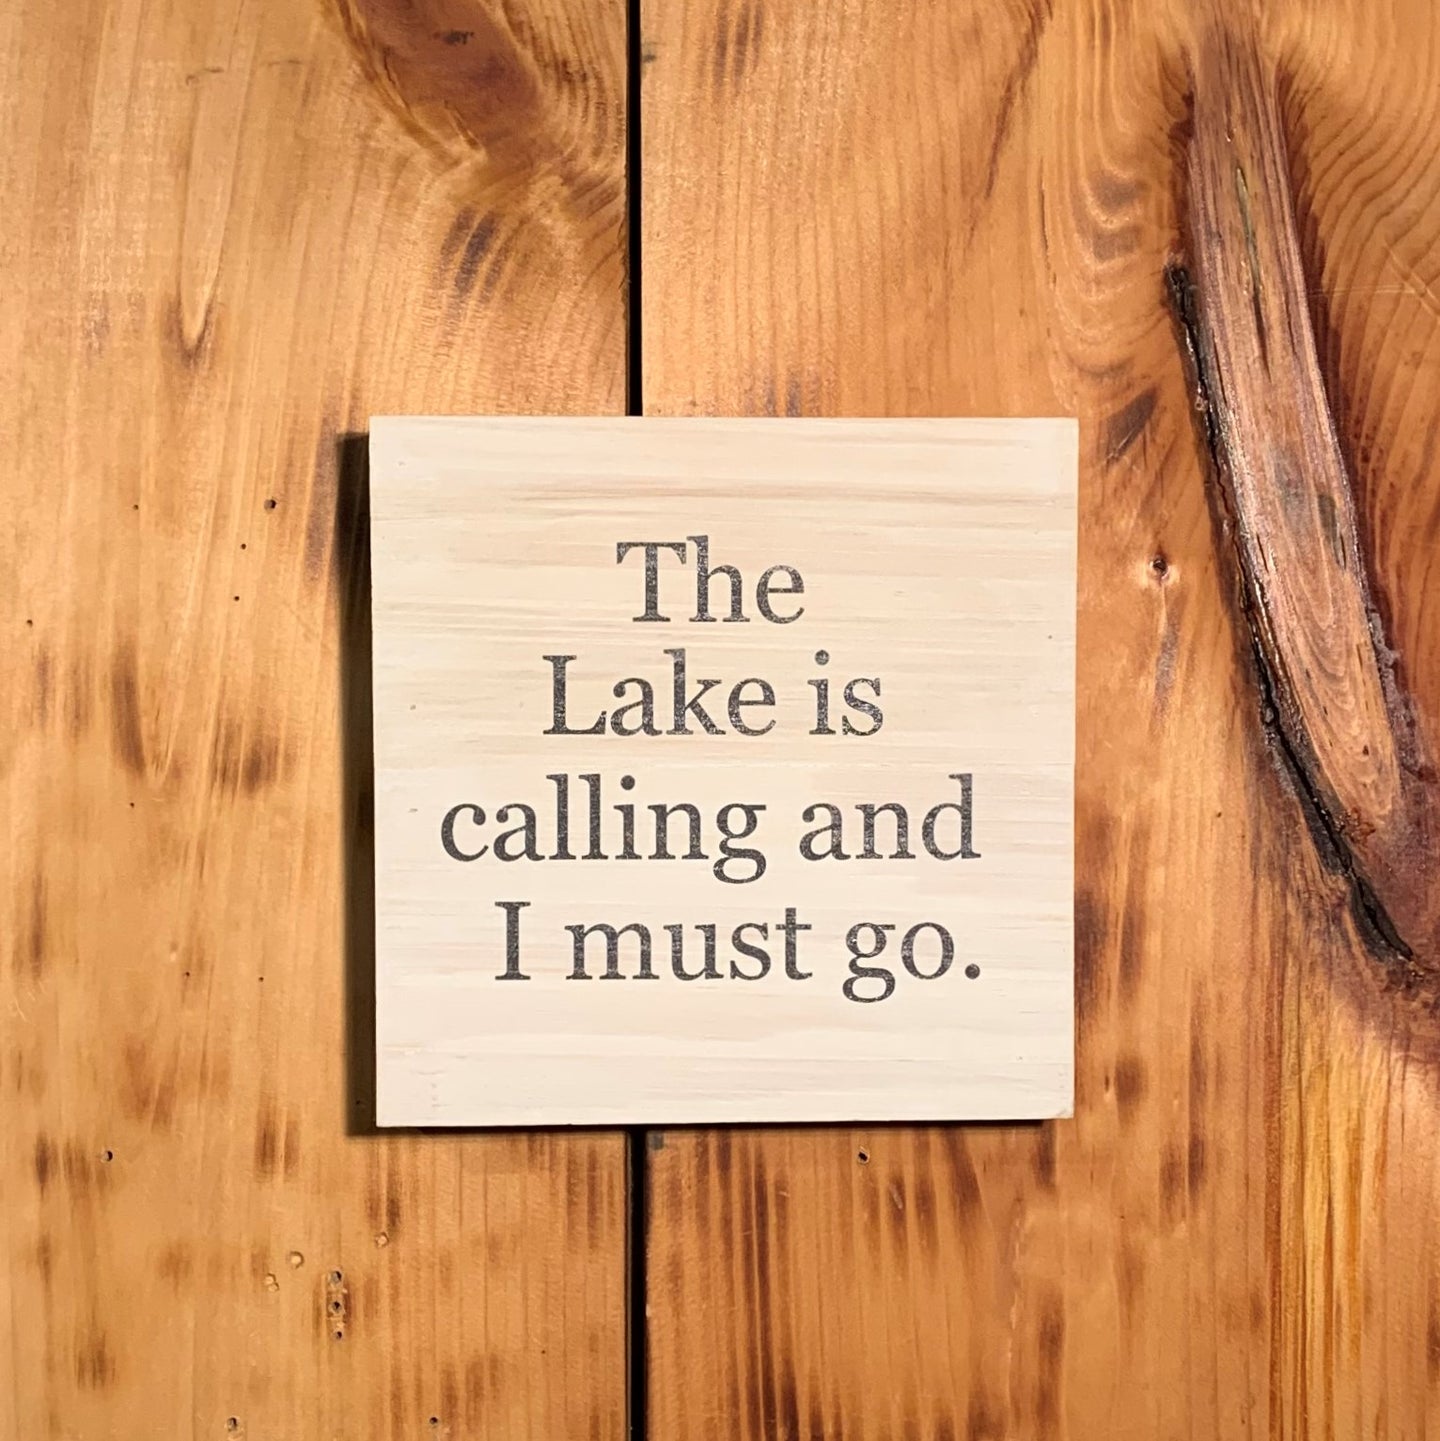 The Lake is Calling and I must go sign